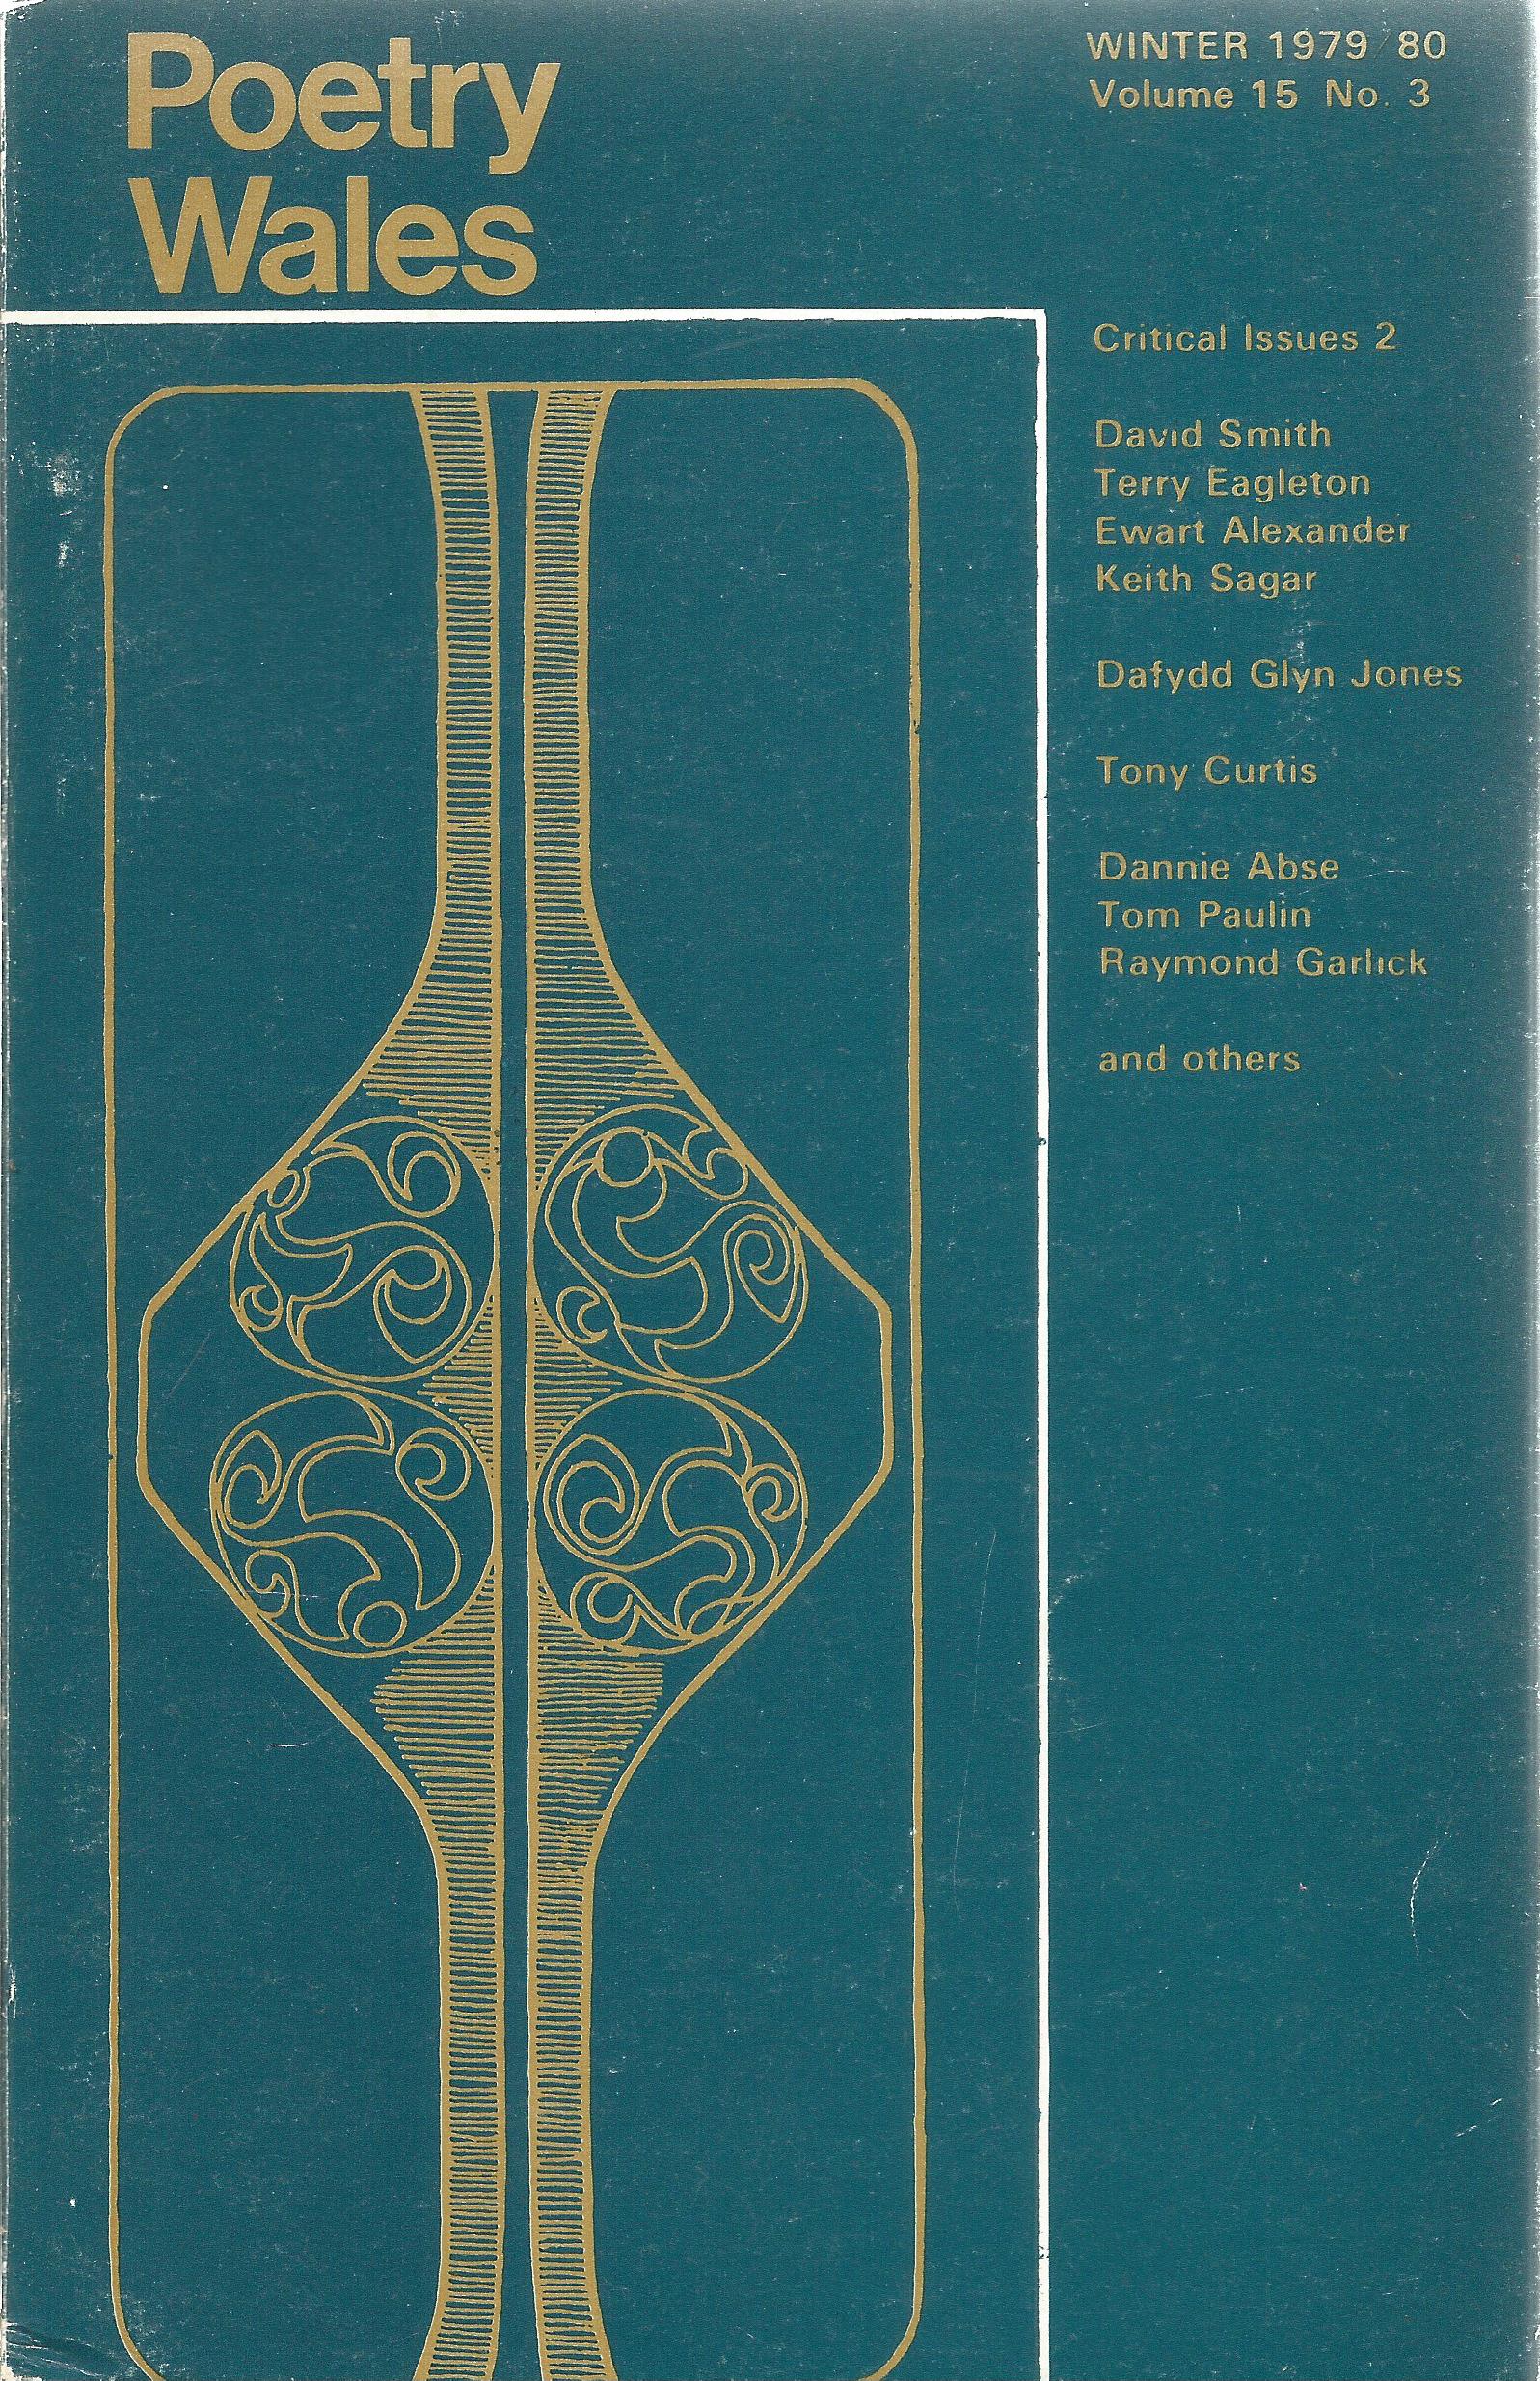 Poetry Wales edited by J P Ward 1979 Softback Book published by Salesbury Press some ageing good